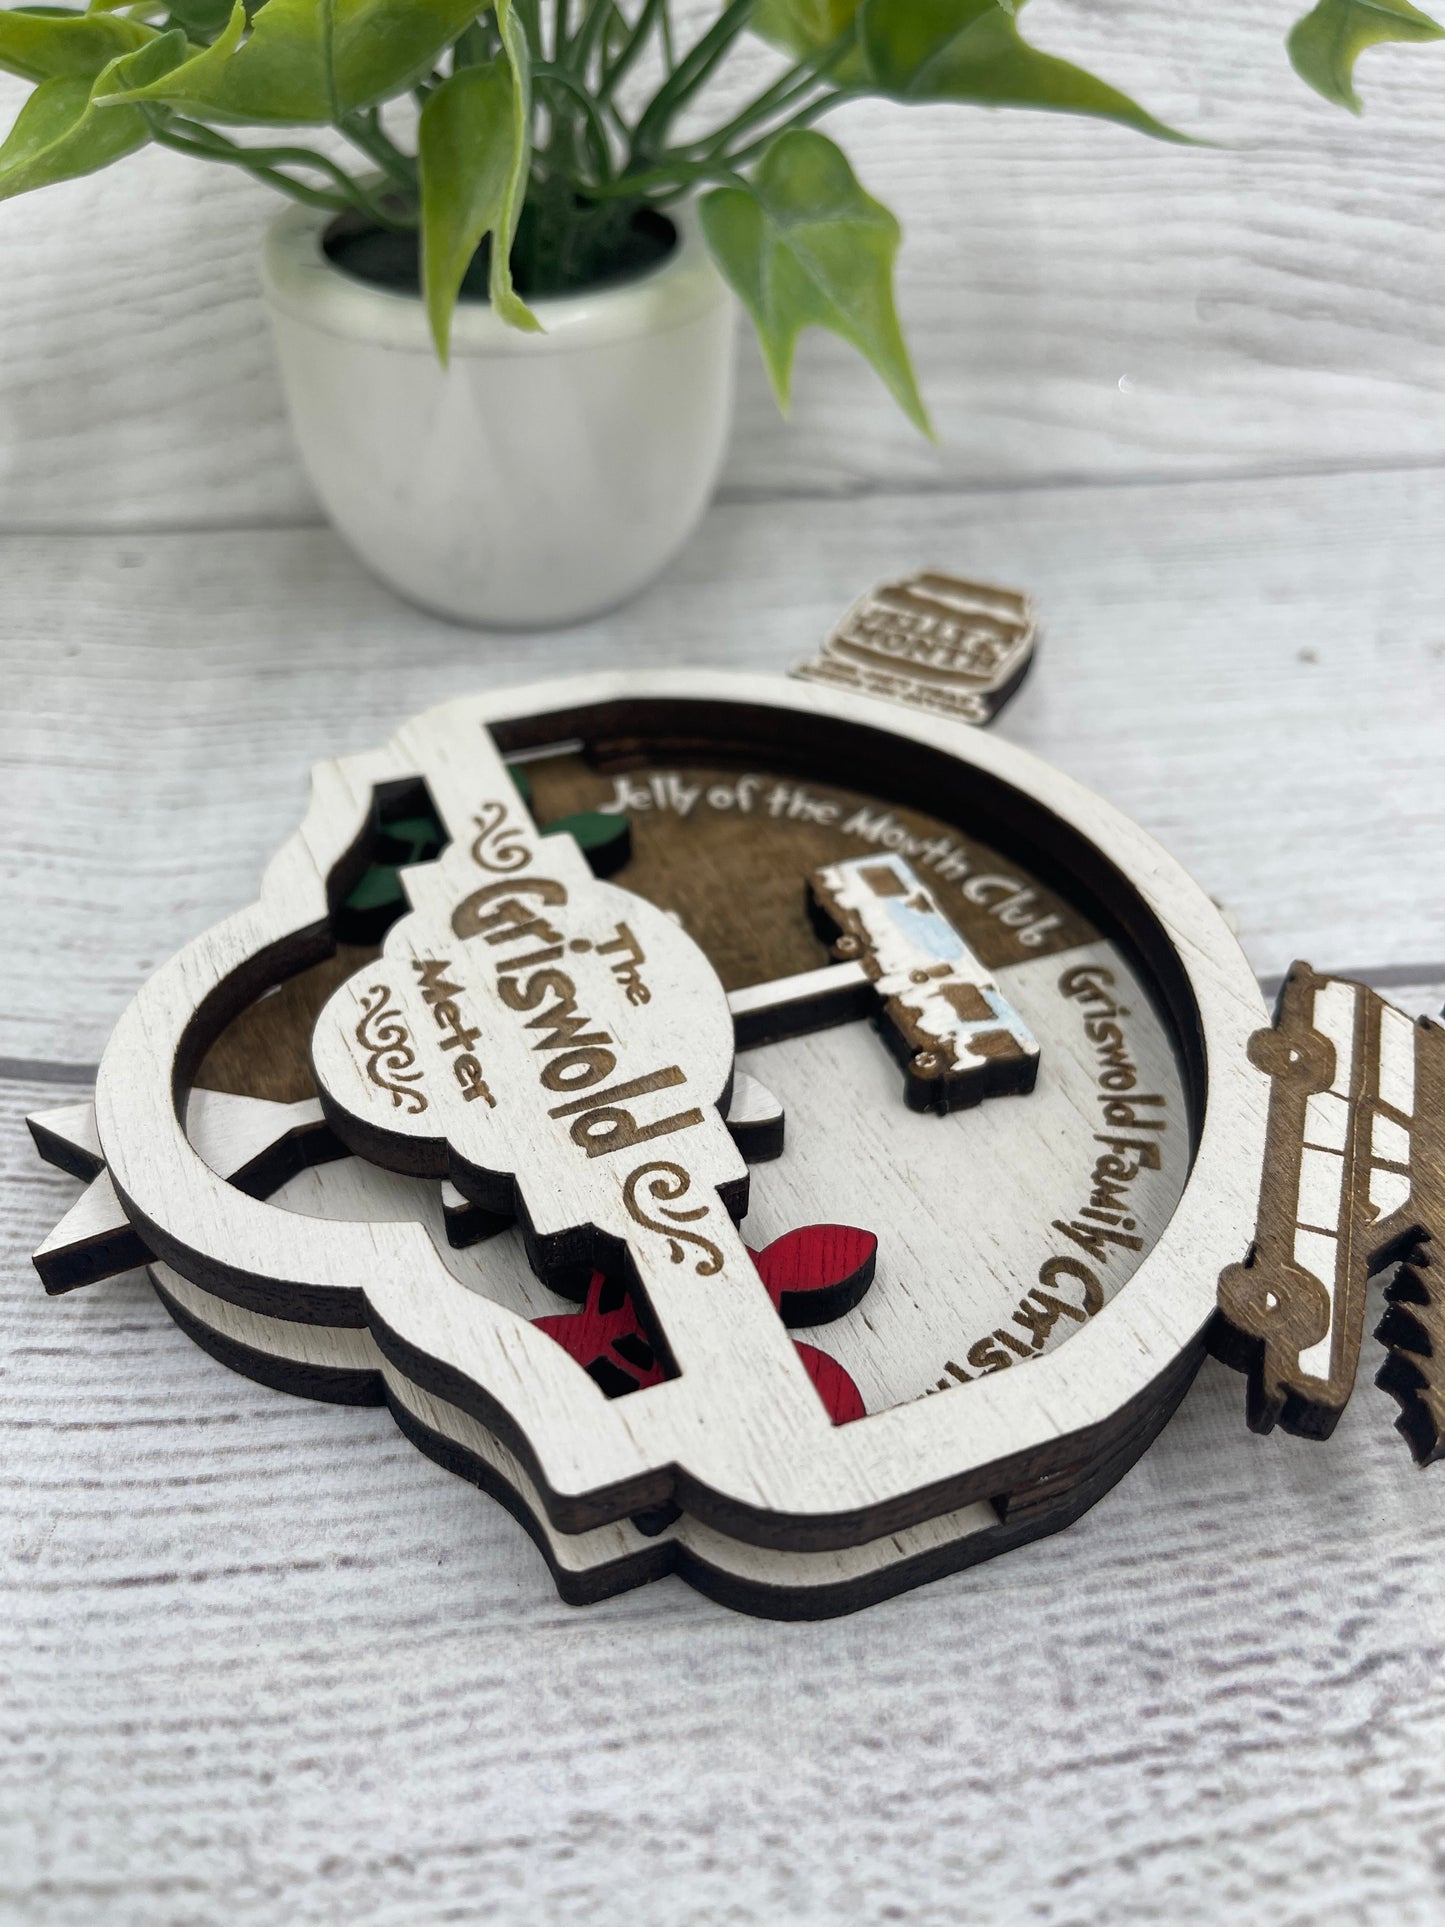 The Griswold Meter Christmas Vacation Inspired Ornament - Jelly of the Month or Griswold Family Christmas - Moveable Gears